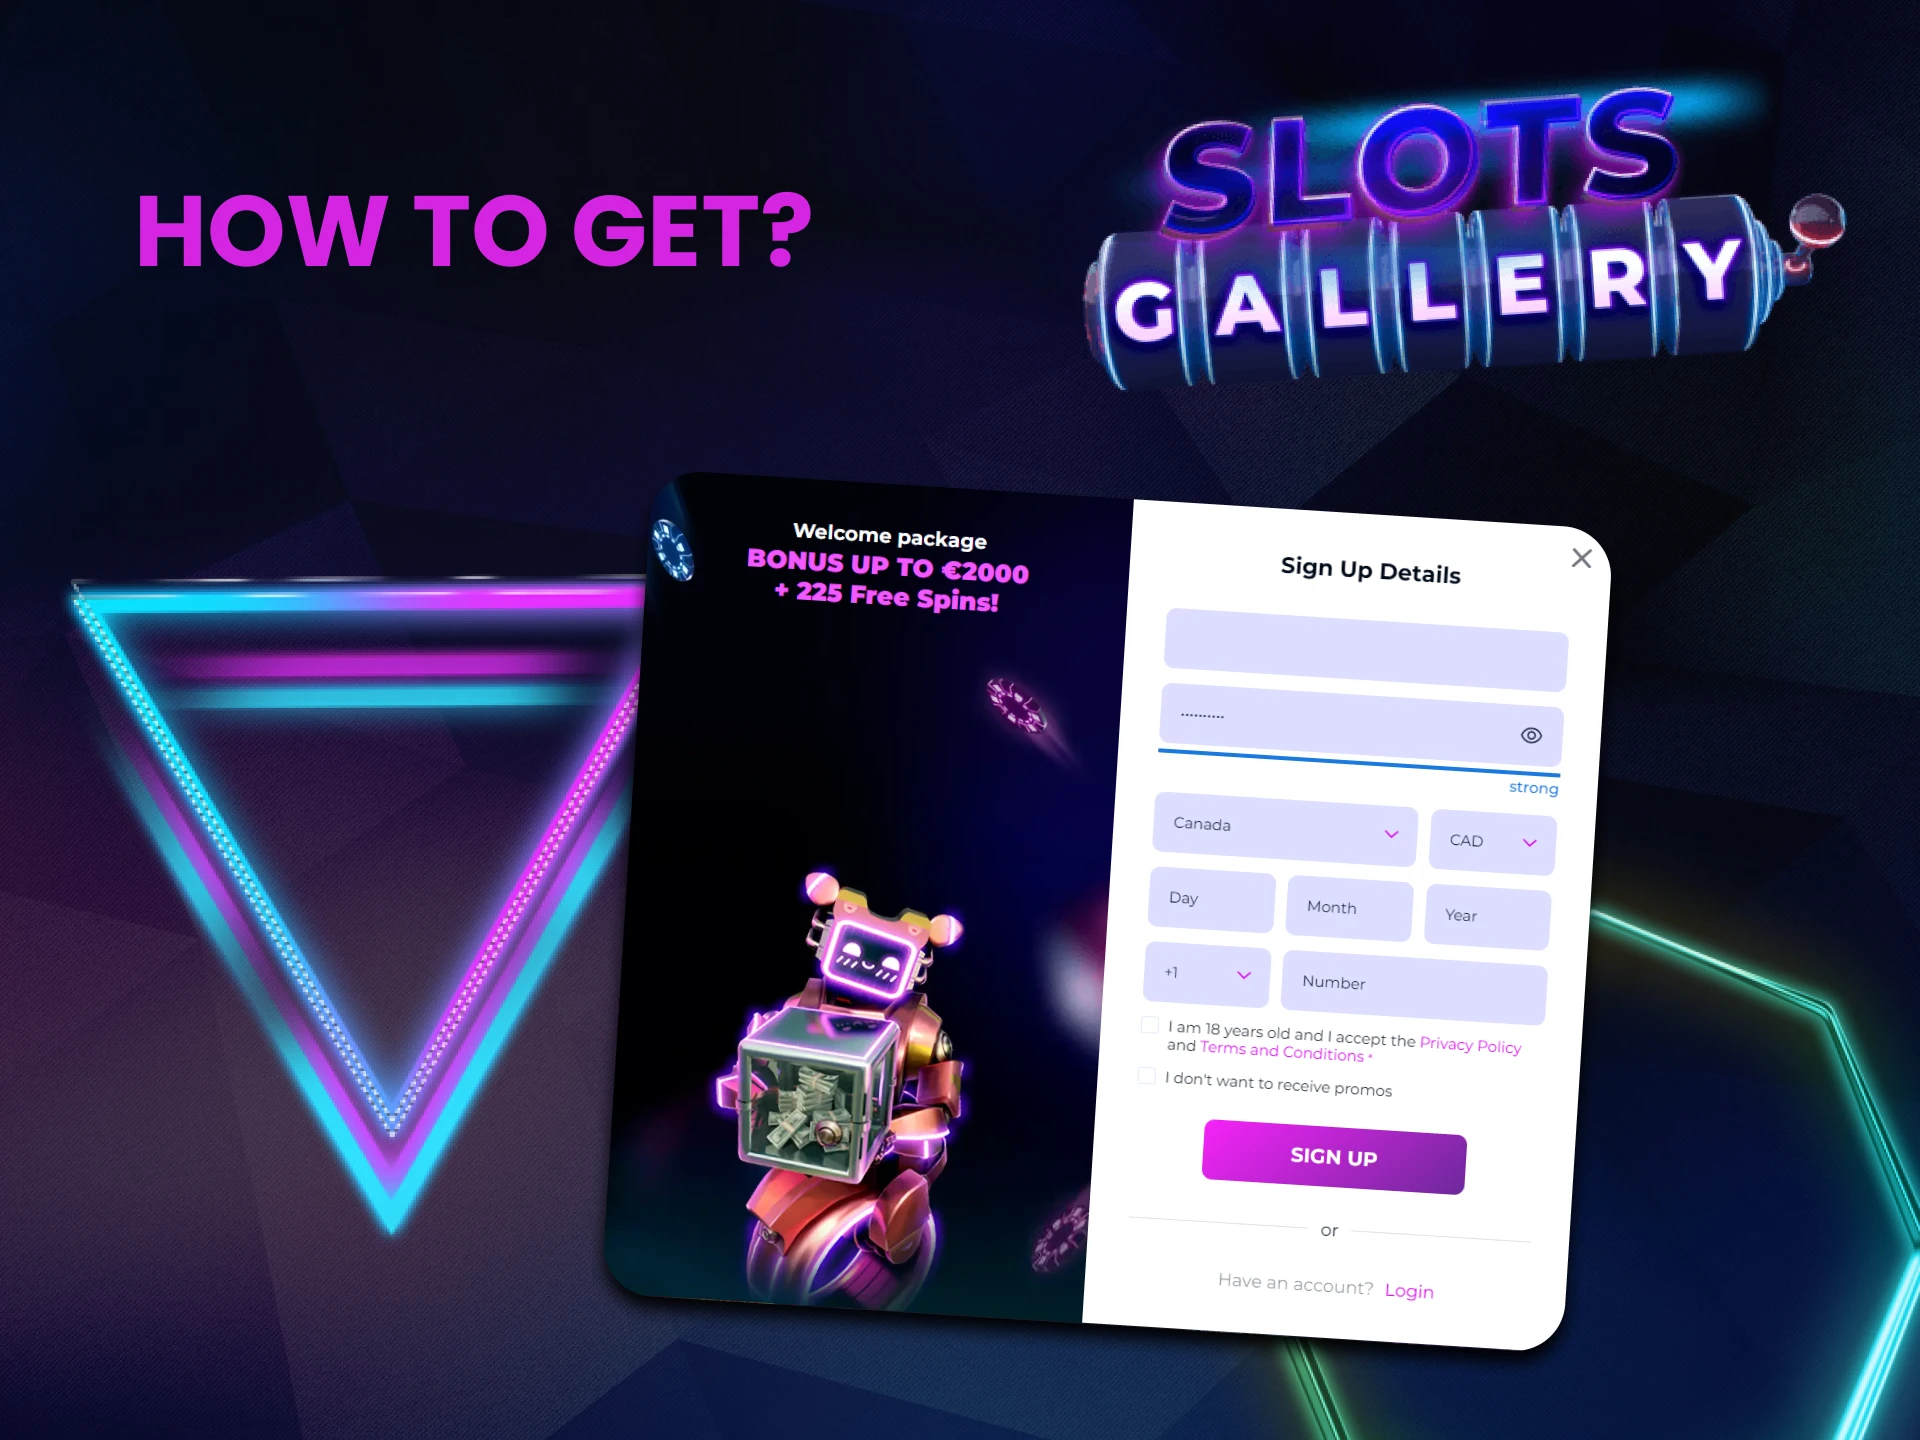 Slots Gallery gives you a bonus for free spins.